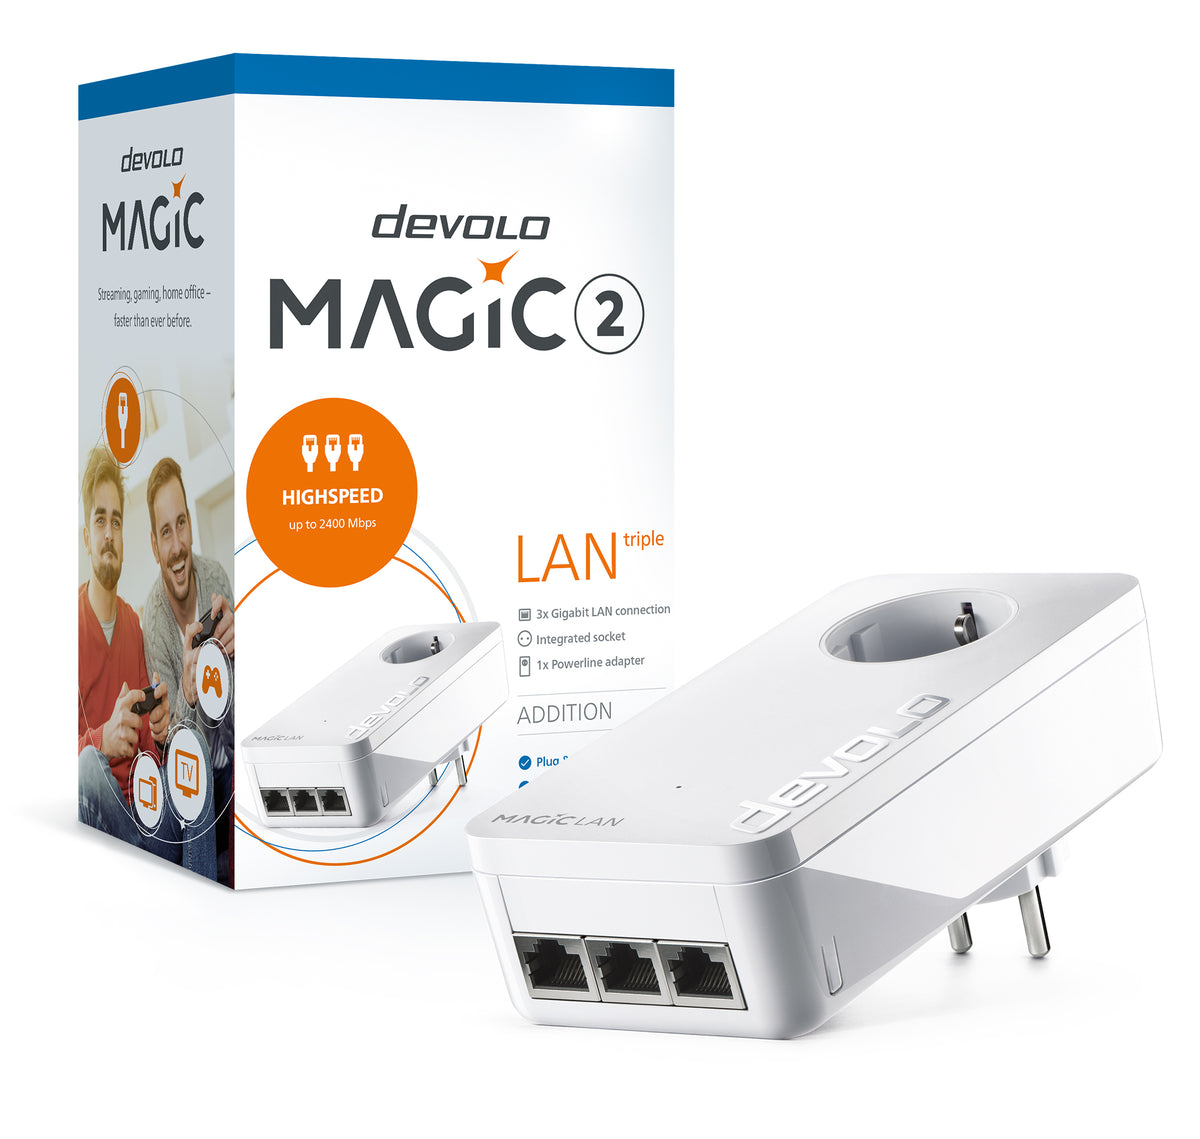 devolo Magic 2 triple LAN, additional adapter, PLC speed up to 2400Mbps w/ 3 Gigabit ports - PT8509